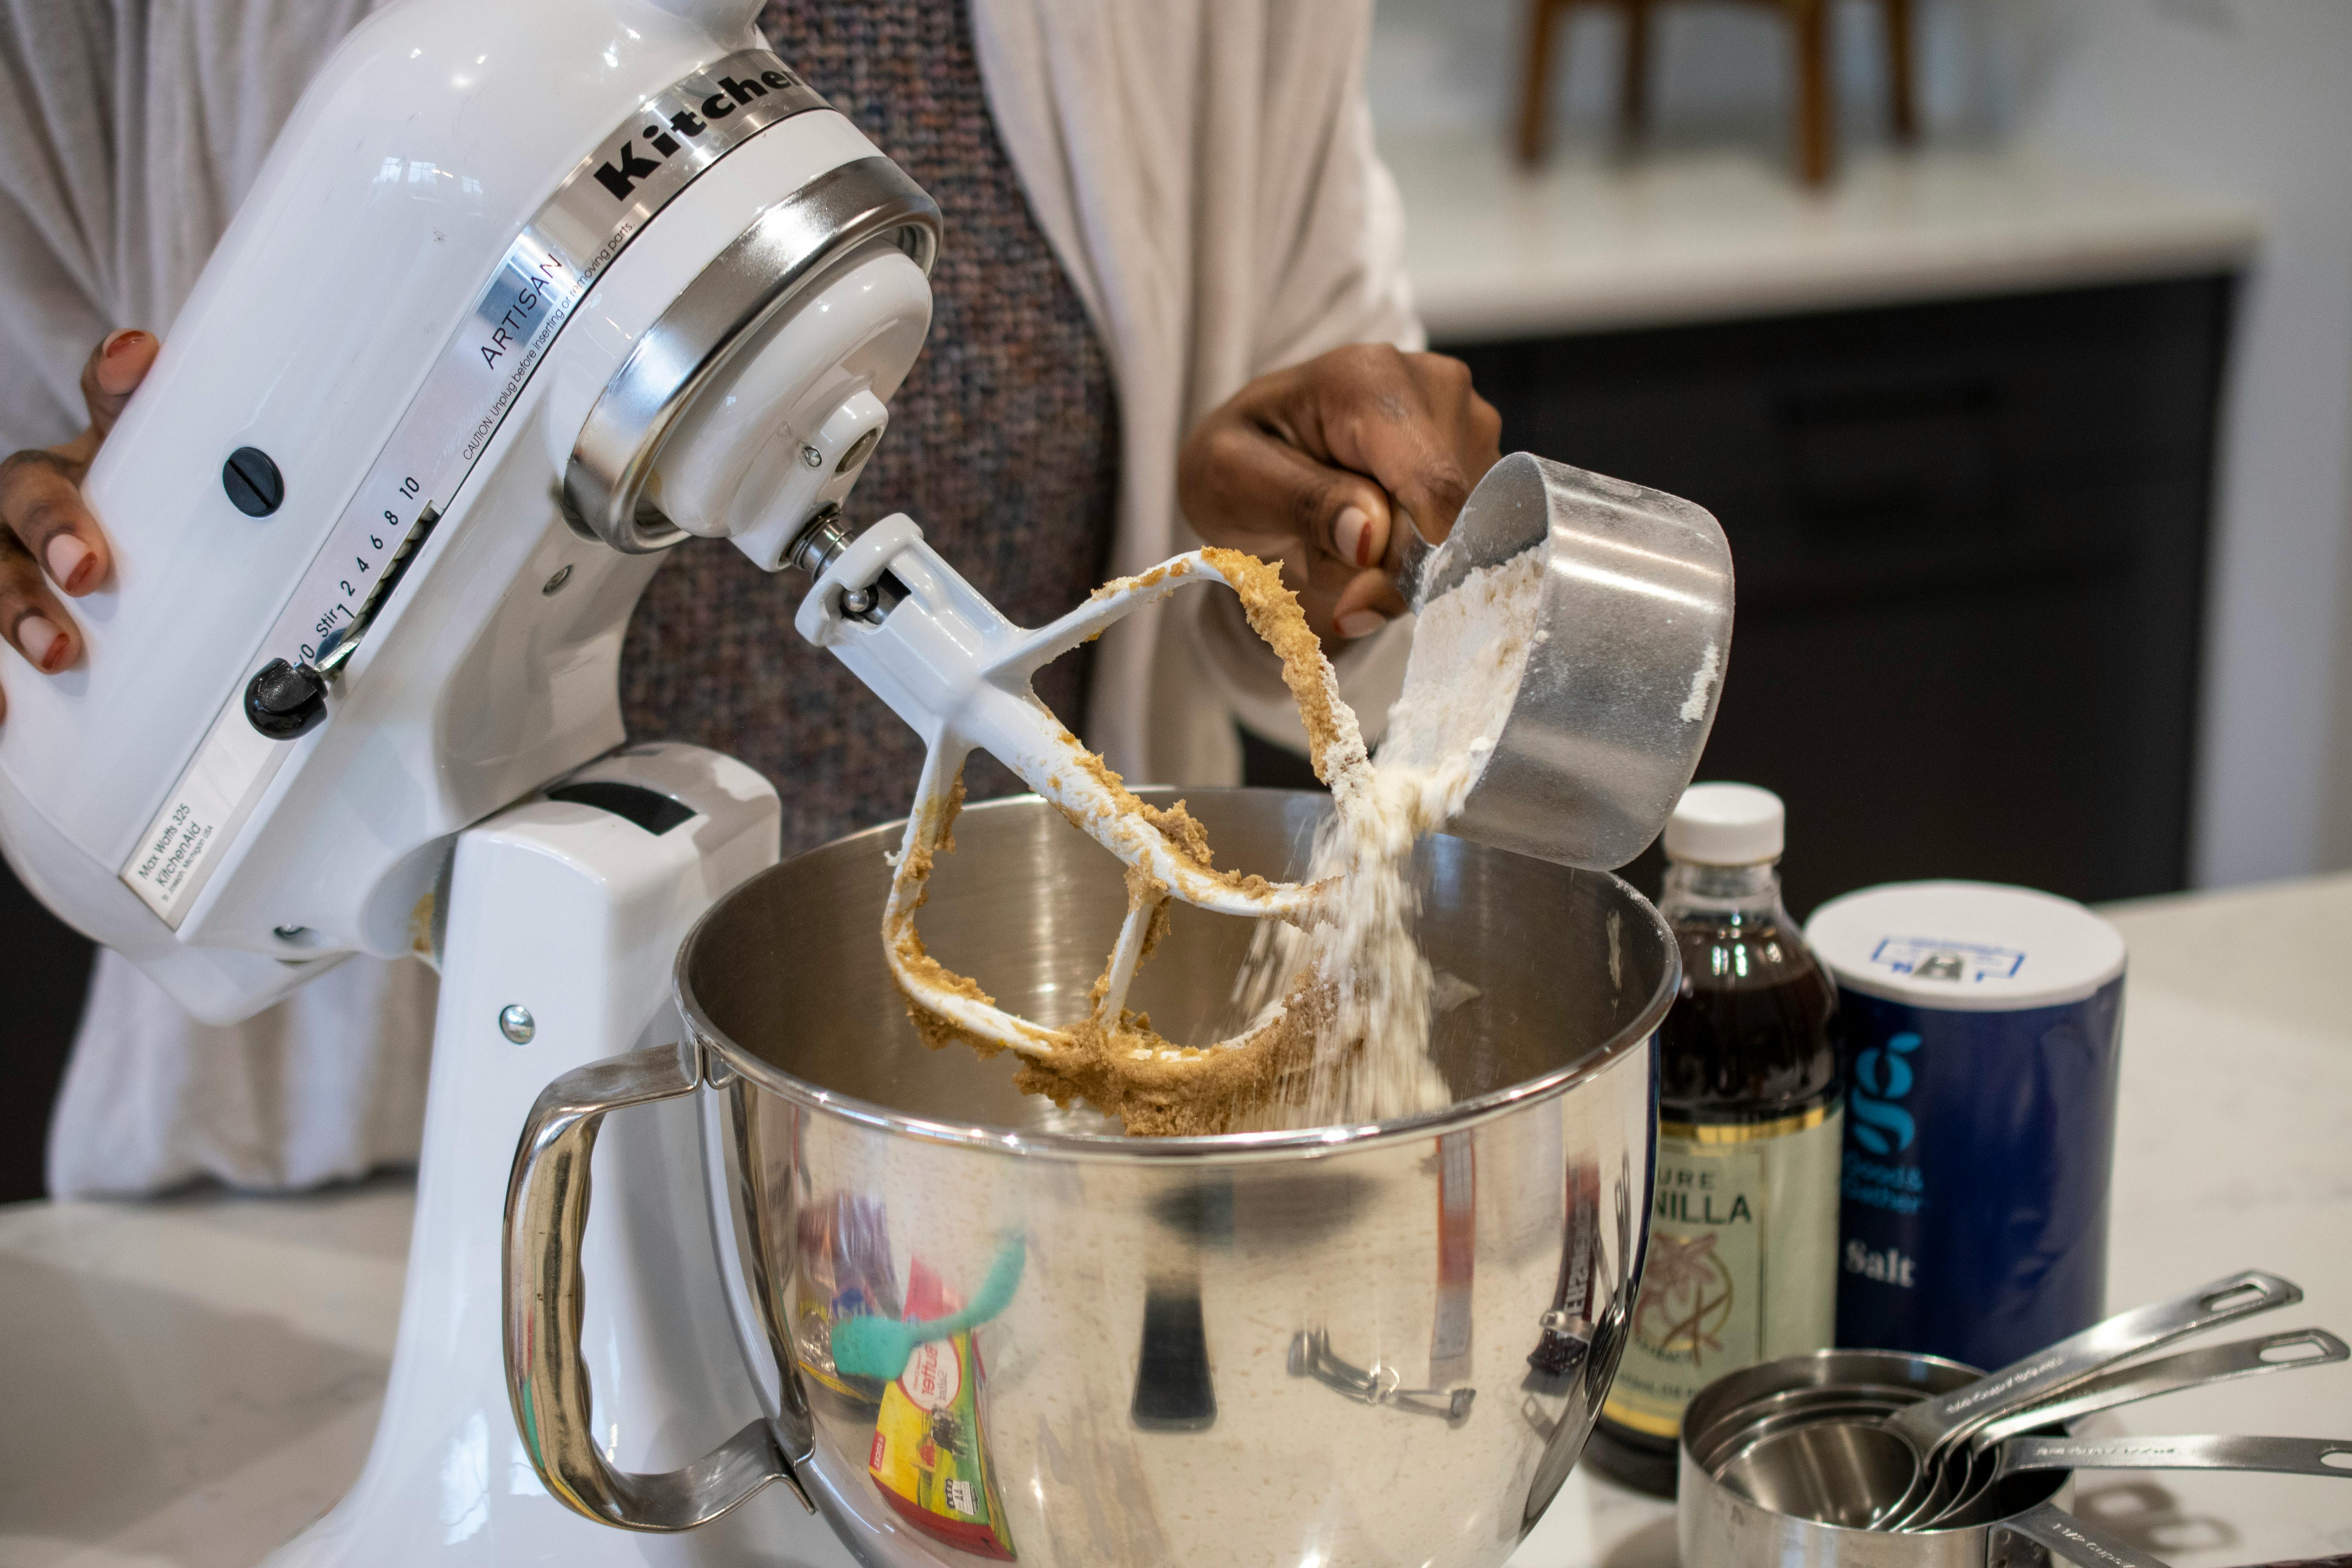 KitchenAid Mixer Attachment Recall and/or Lawsuit Coming? - The